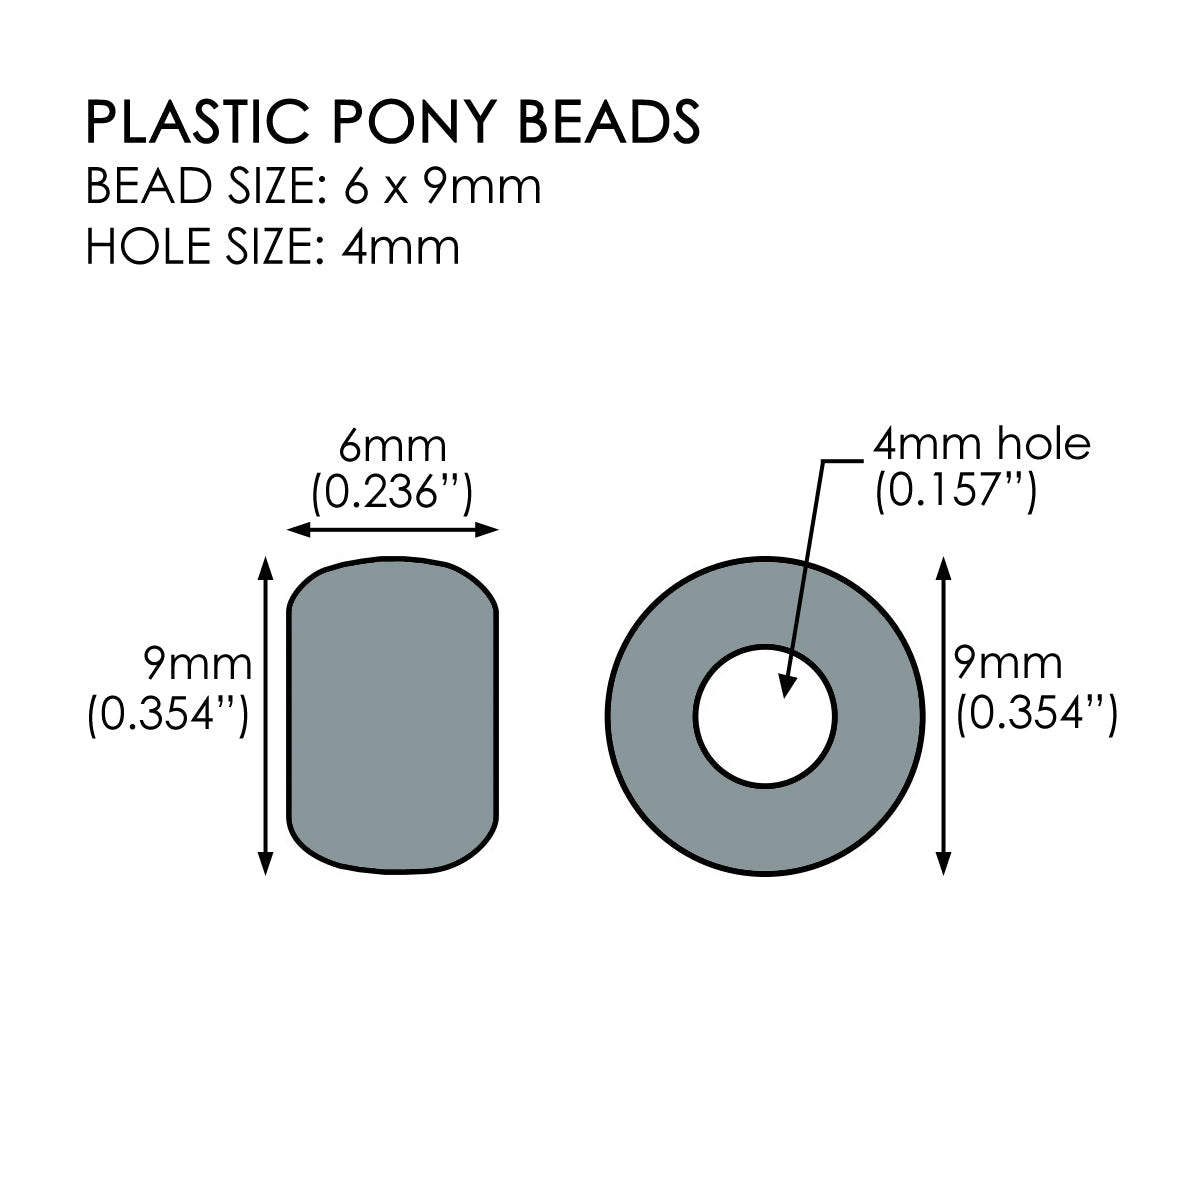 Crystal Frost Matte Plastic Craft Pony Beads, Size 6 x 9mm